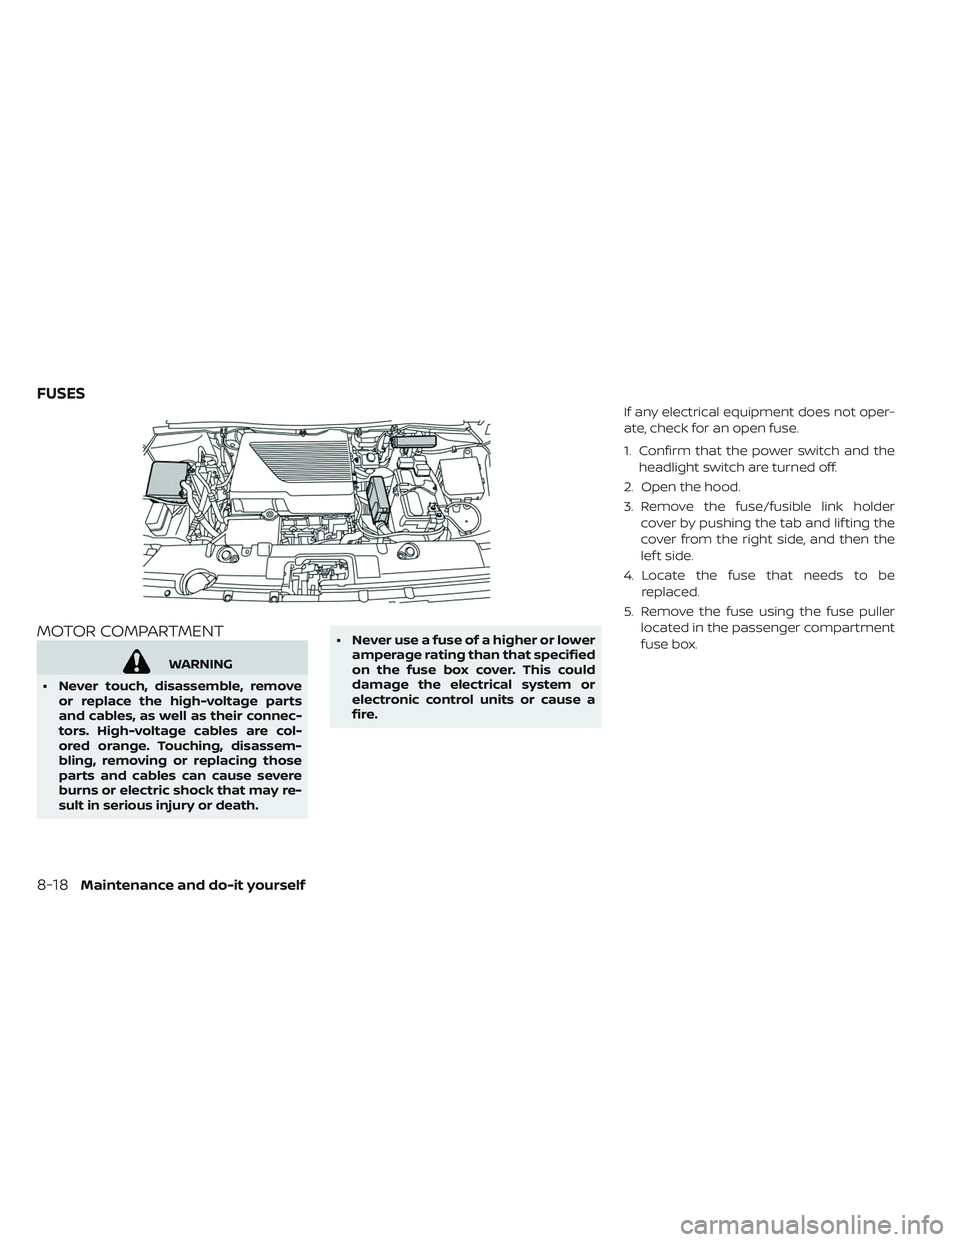 NISSAN LEAF 2019  Owner´s Manual MOTOR COMPARTMENT
WARNING
• Never touch, disassemble, remove or replace the high-voltage parts
and cables, as well as their connec-
tors. High-voltage cables are col-
ored orange. Touching, disassem